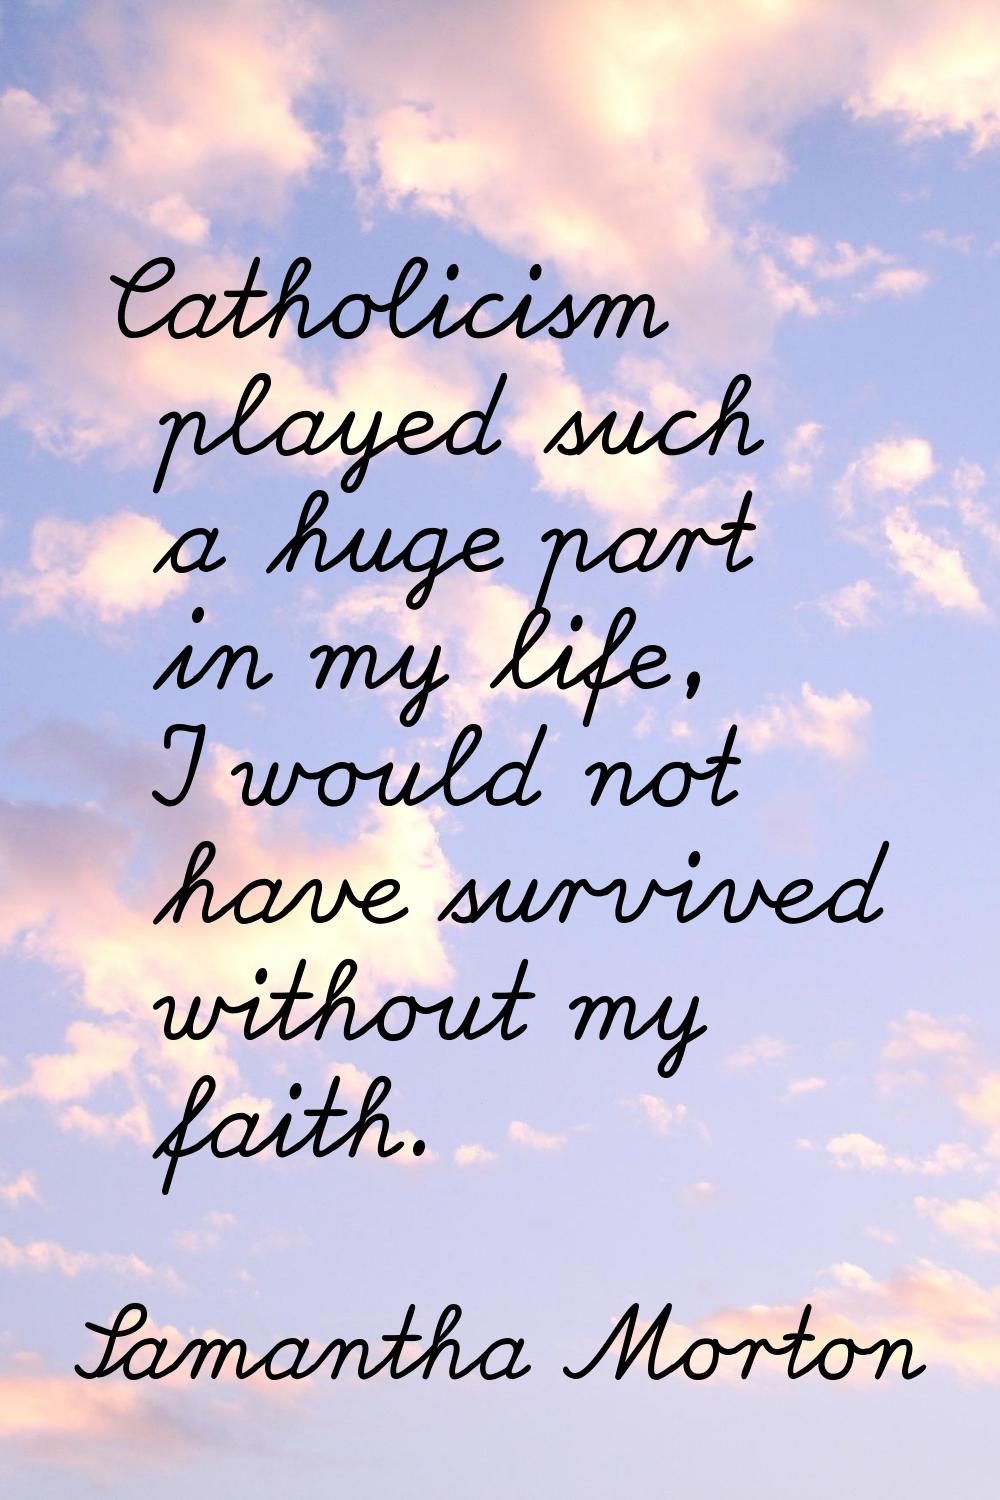 Catholicism played such a huge part in my life, I would not have survived without my faith.